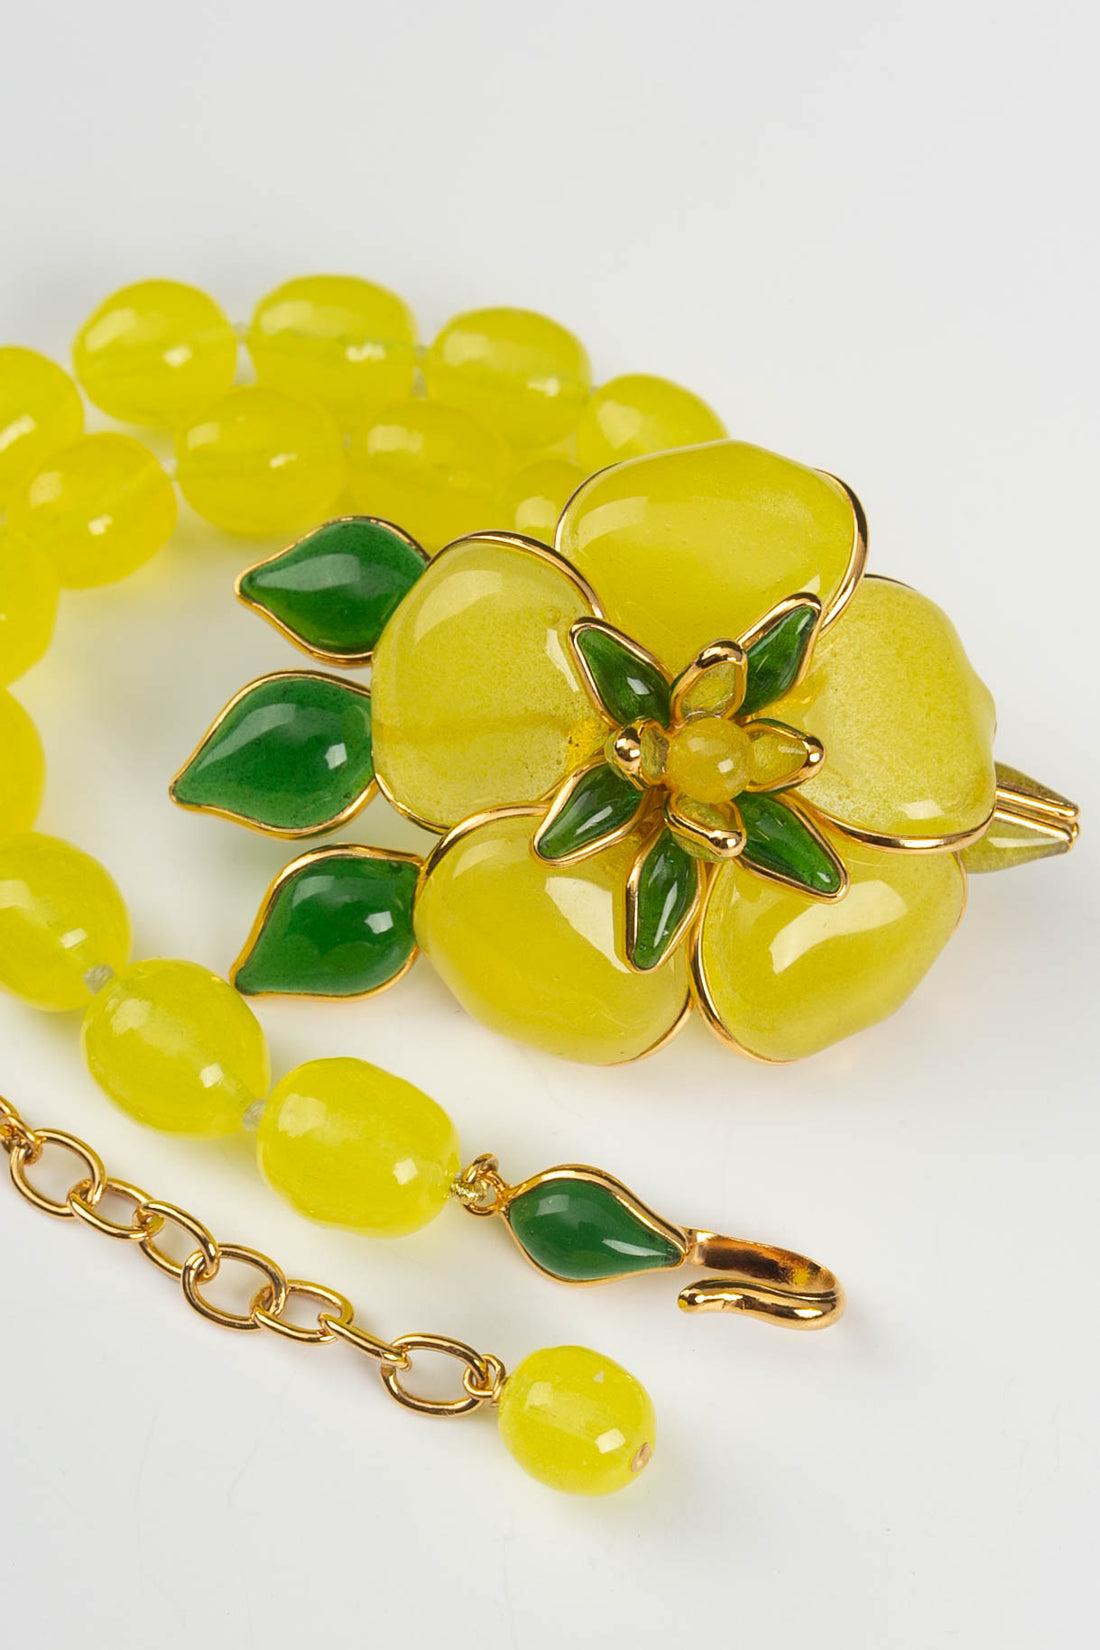 Augustine Short Gilded Metal Necklace in Yellow Glass Paste Flowers For Sale 2